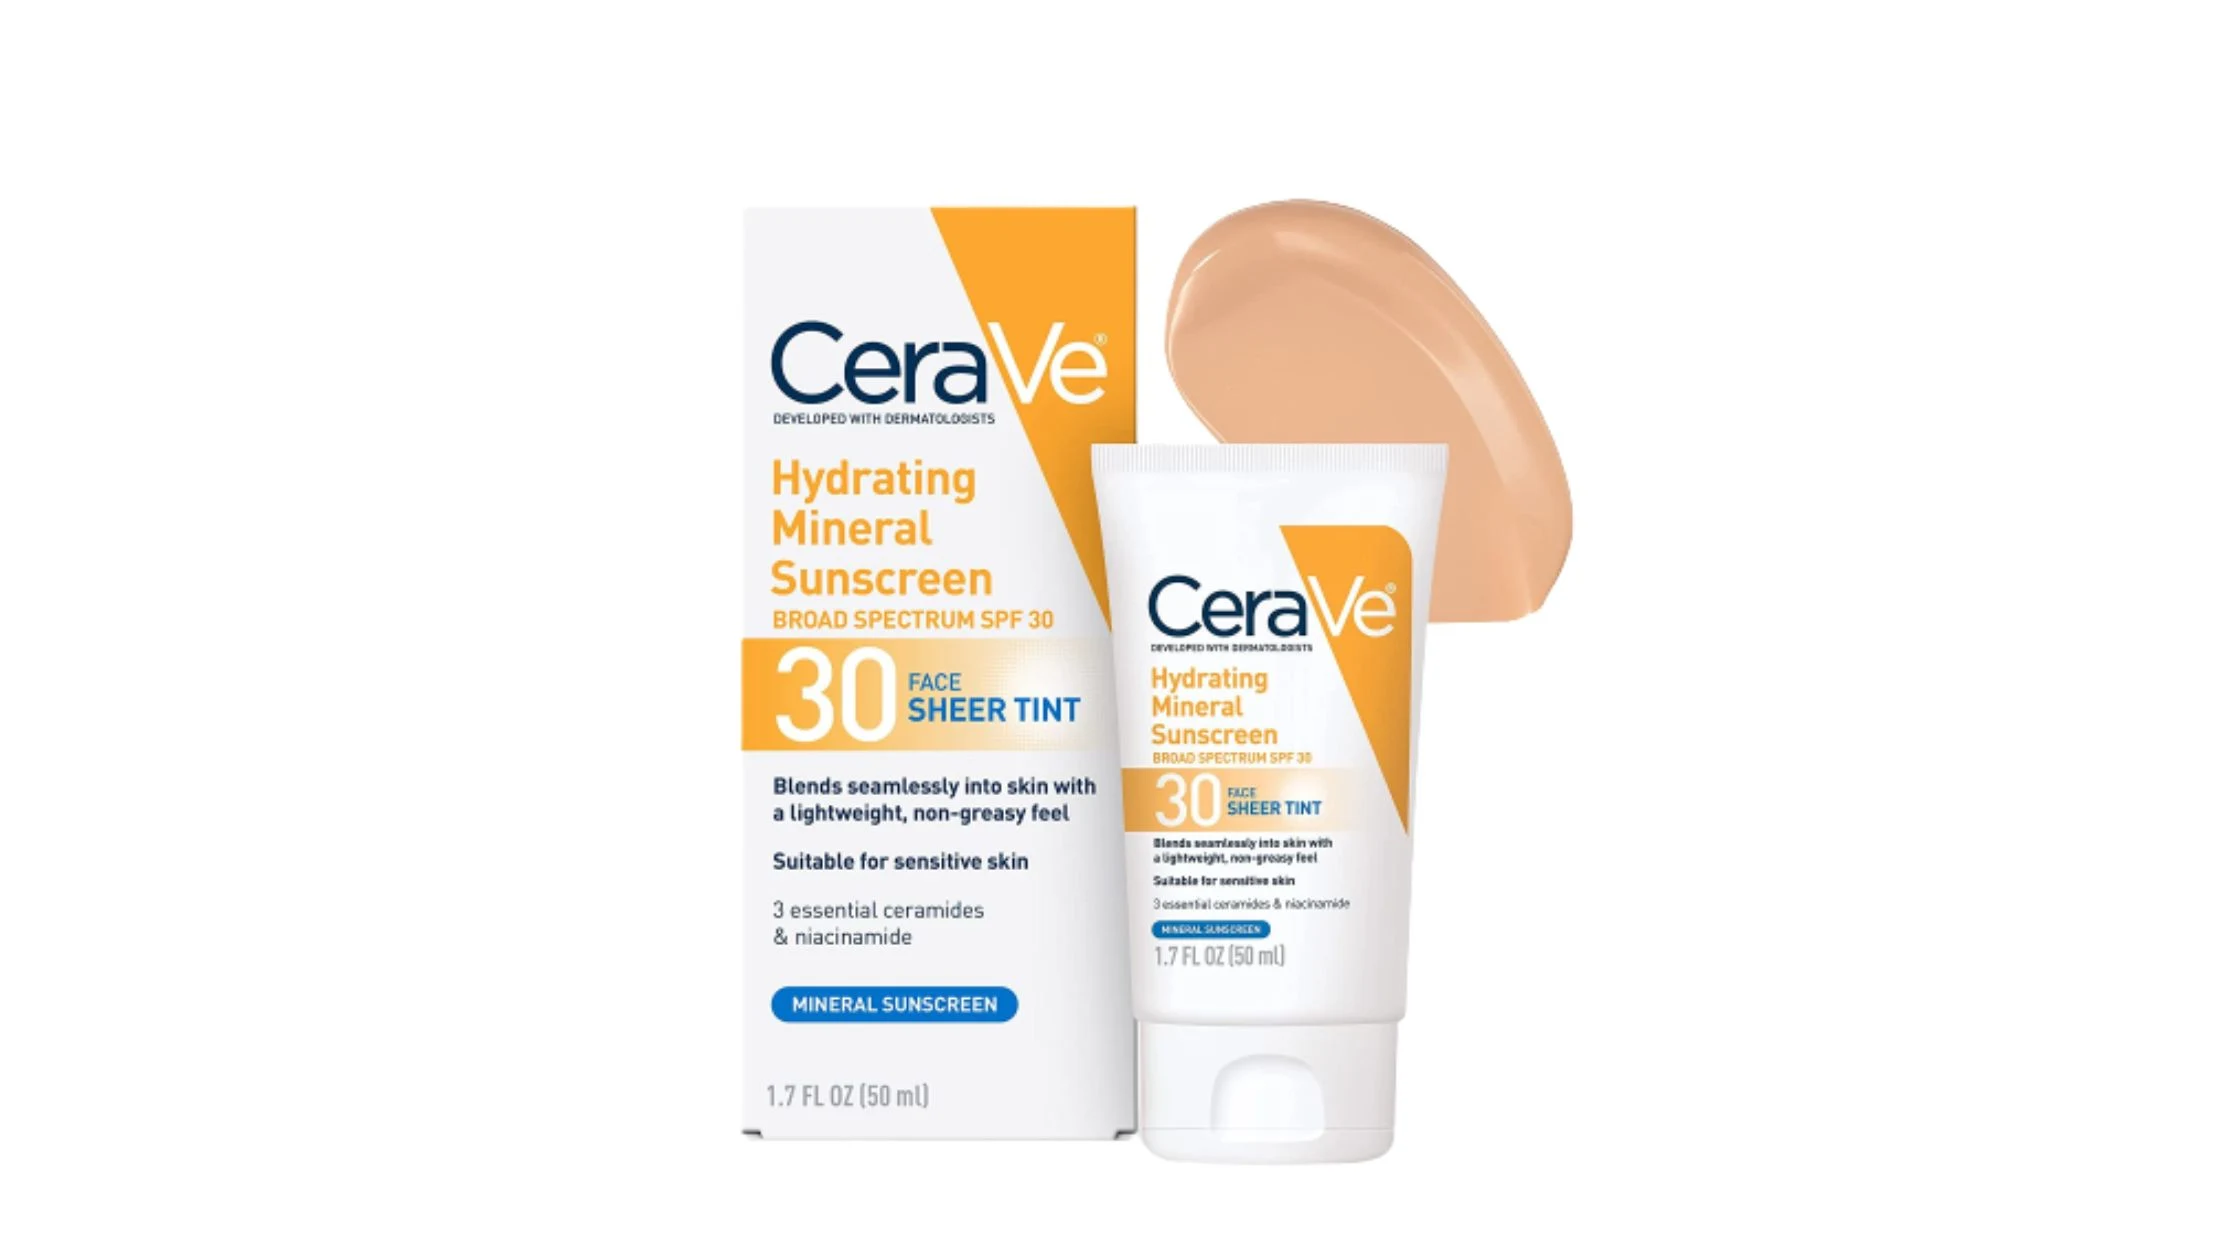 CeraVe Tinted Sunscreen Benefits